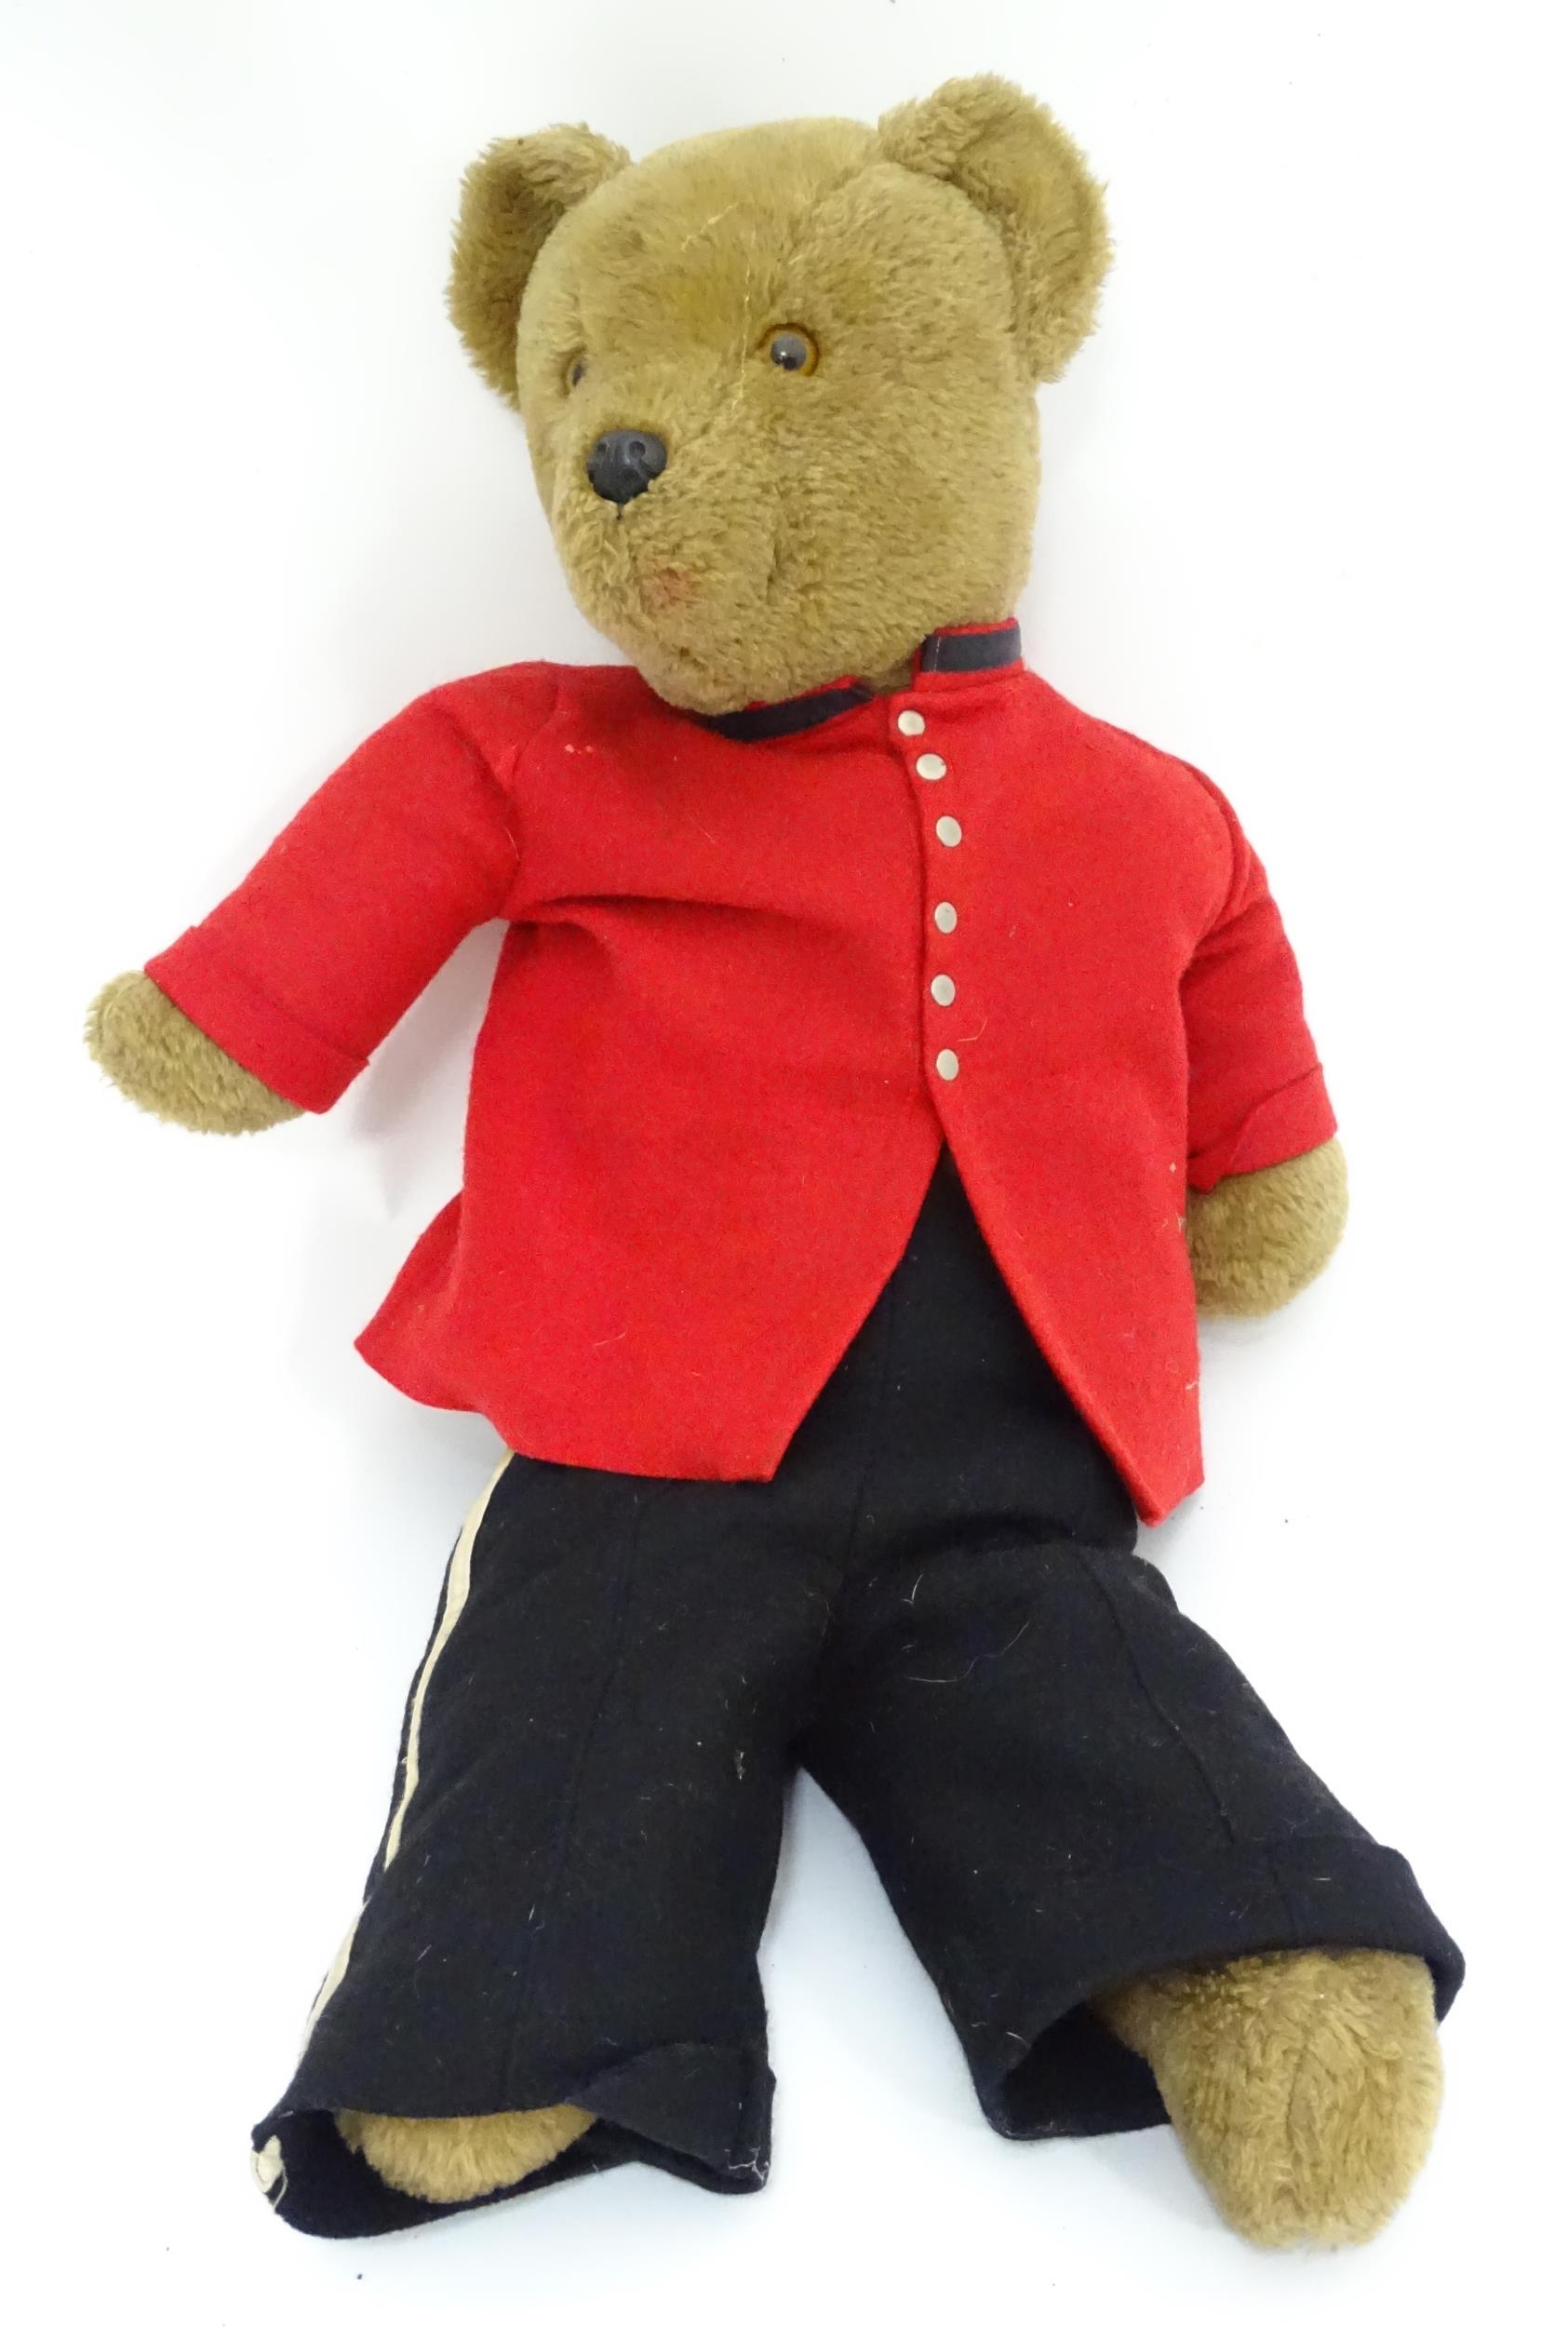 A teddy bear dressed as a Chelsea Pensioner, by Alresford Crafts Ltd. Please Note - we do not make